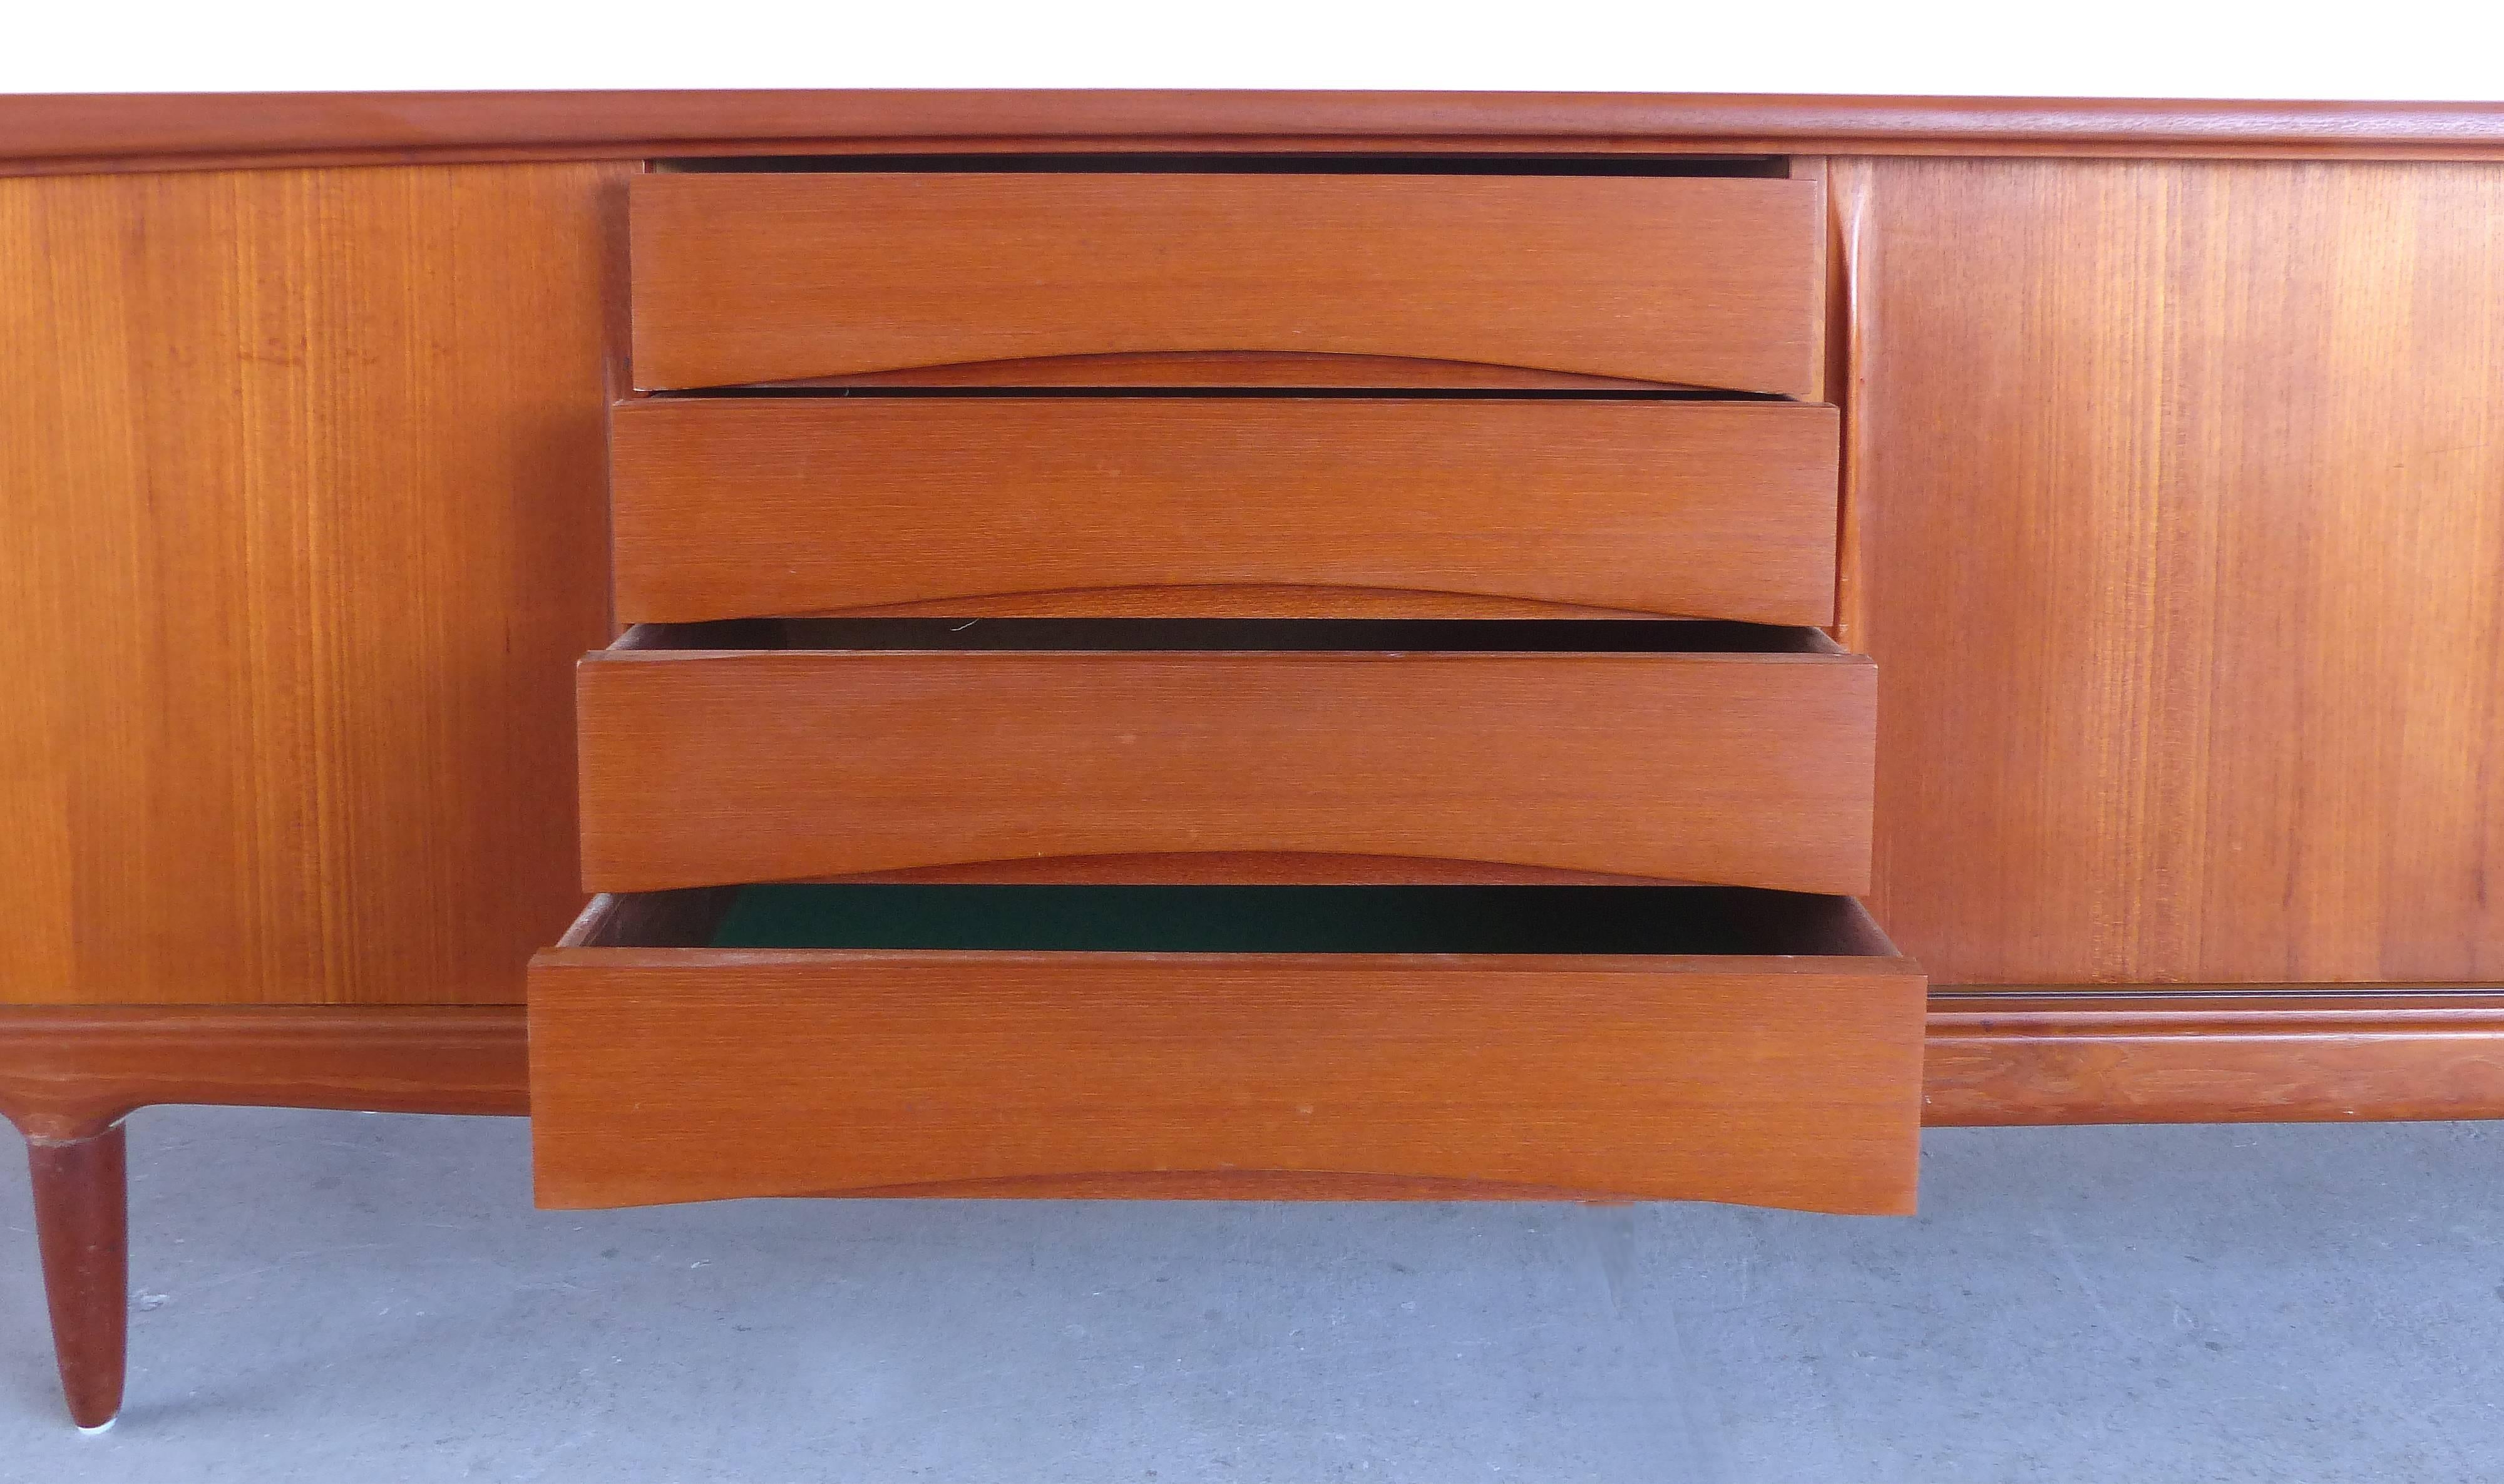 Offered for sale is a very laong iconic Danish modern credenza by Arne Vodder in teak. The credenza has sliding panels which are placed to reveal drawers and shelves. The drawers pull open from the recessed notches beneath the curved drawer fronts.